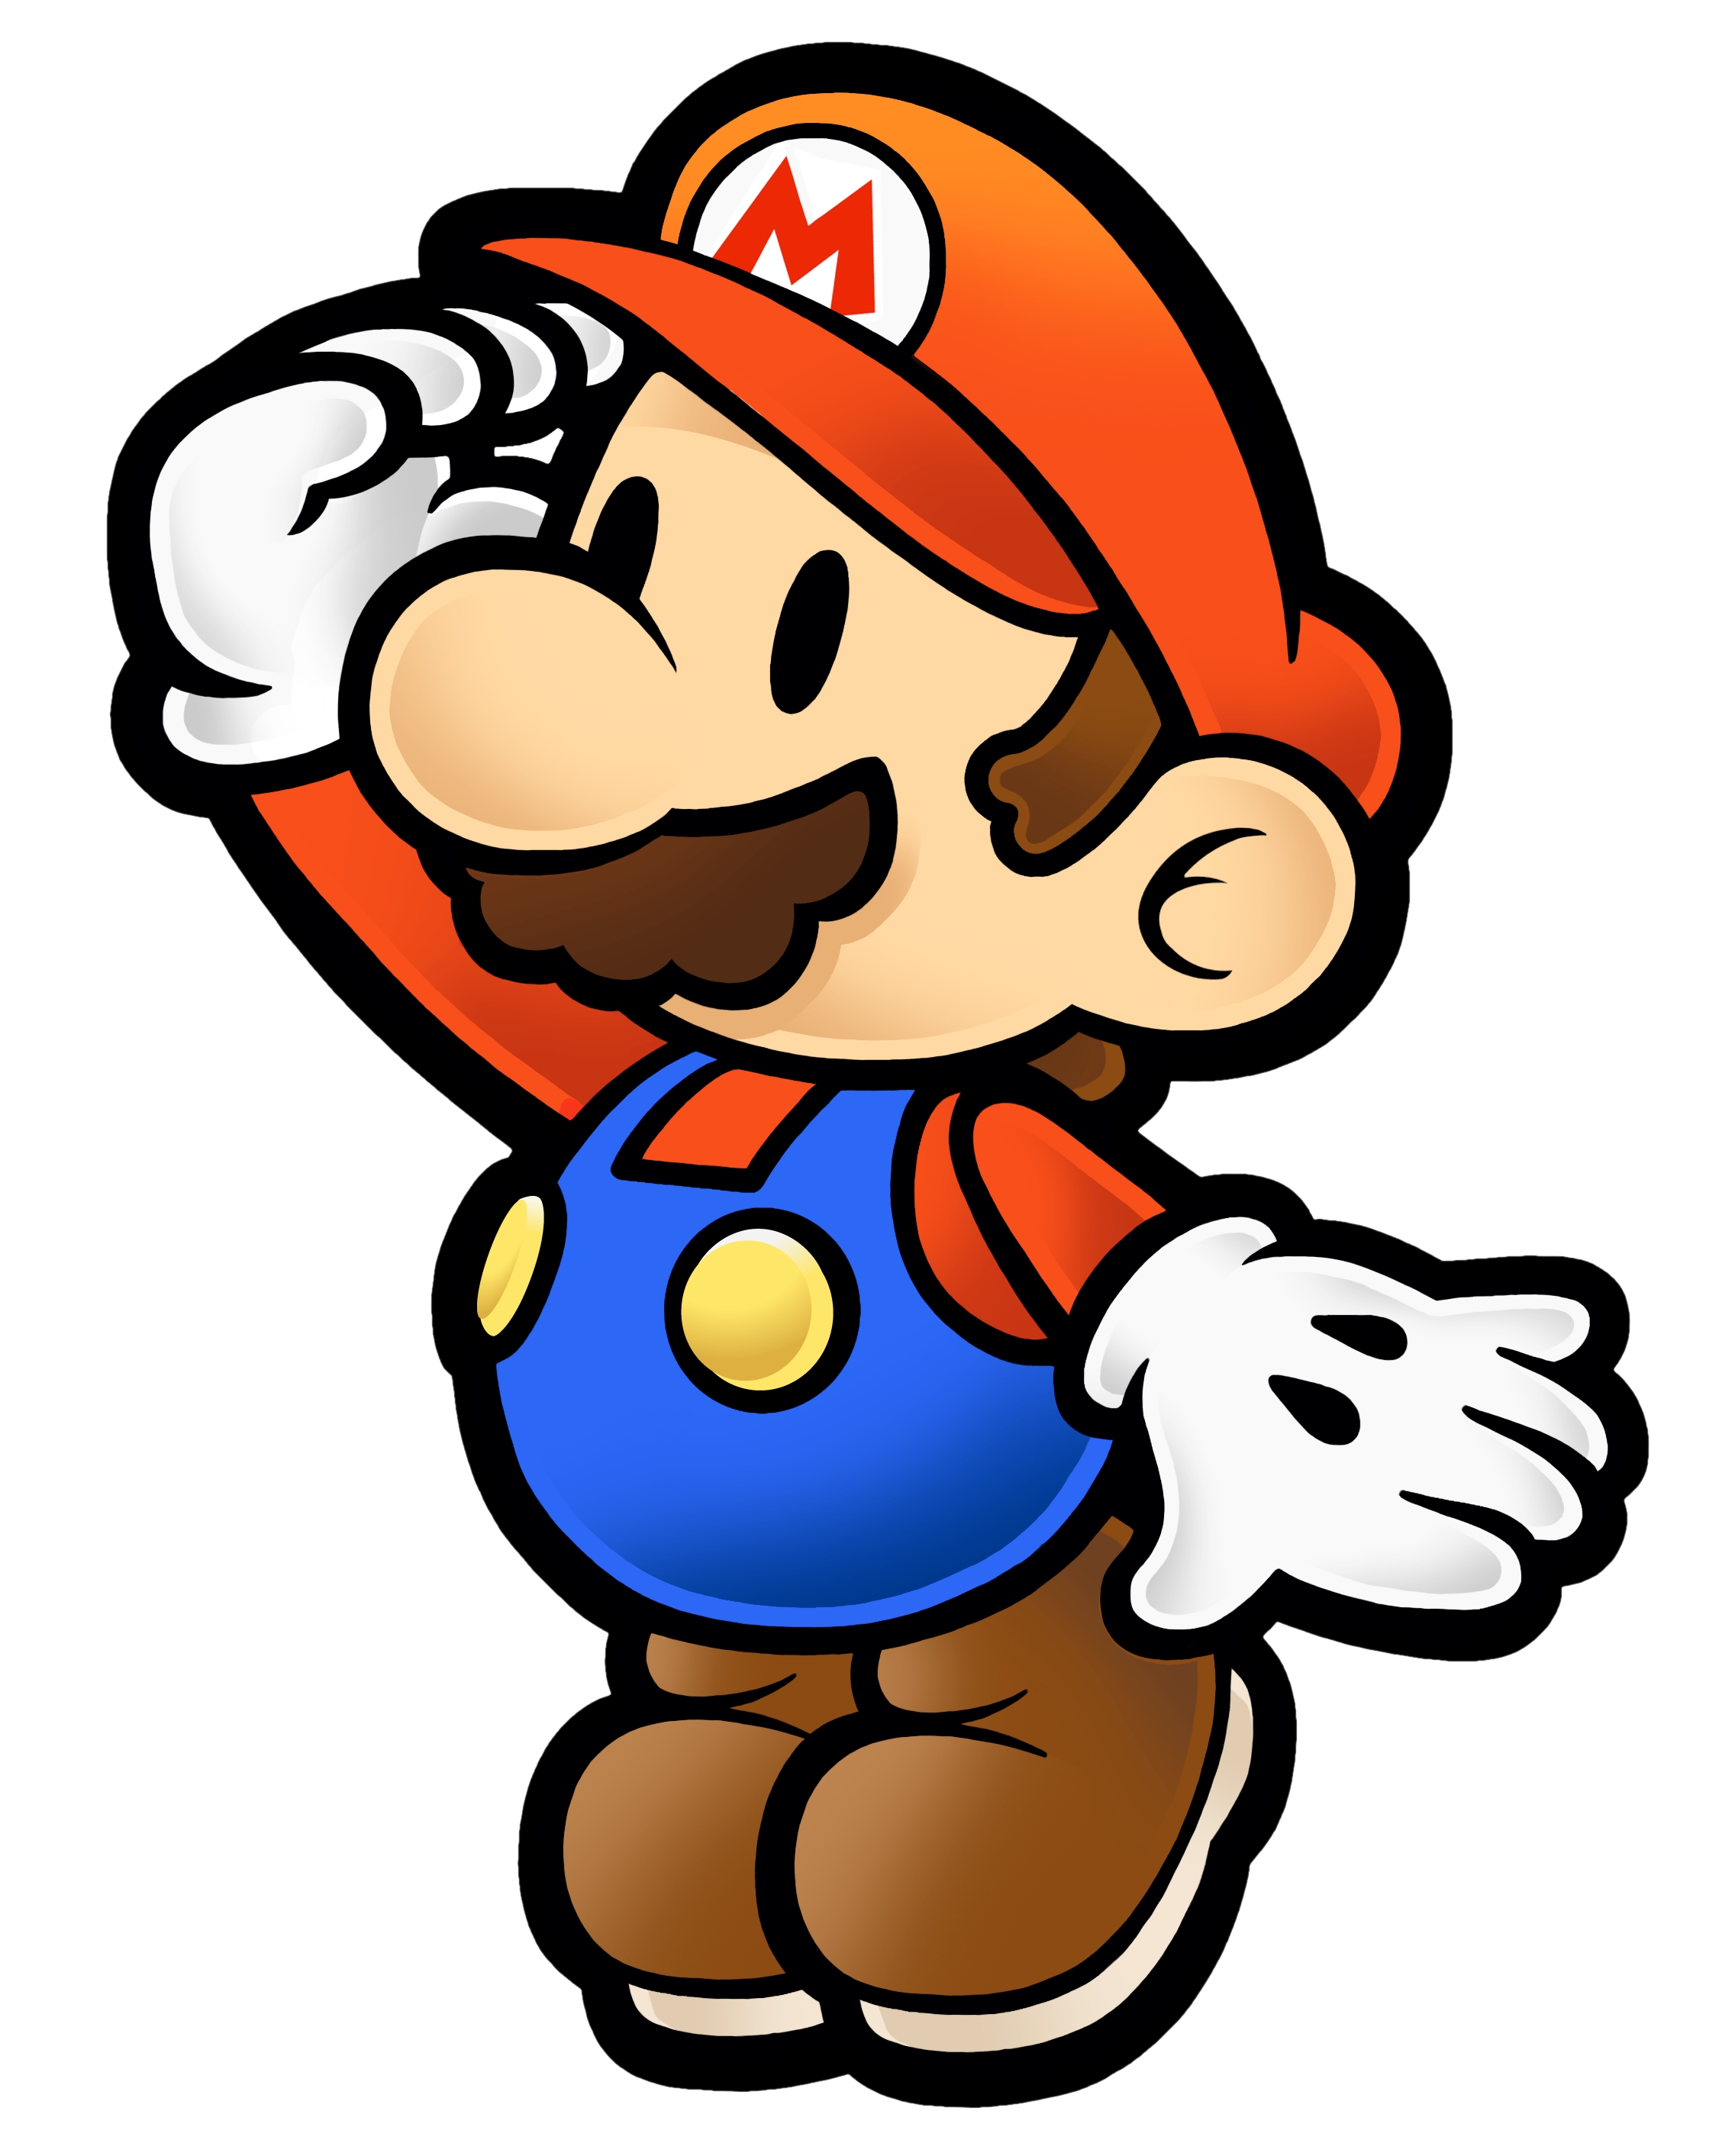 Artwork of Mario from Paper Mario: The Thousand-Year Door.